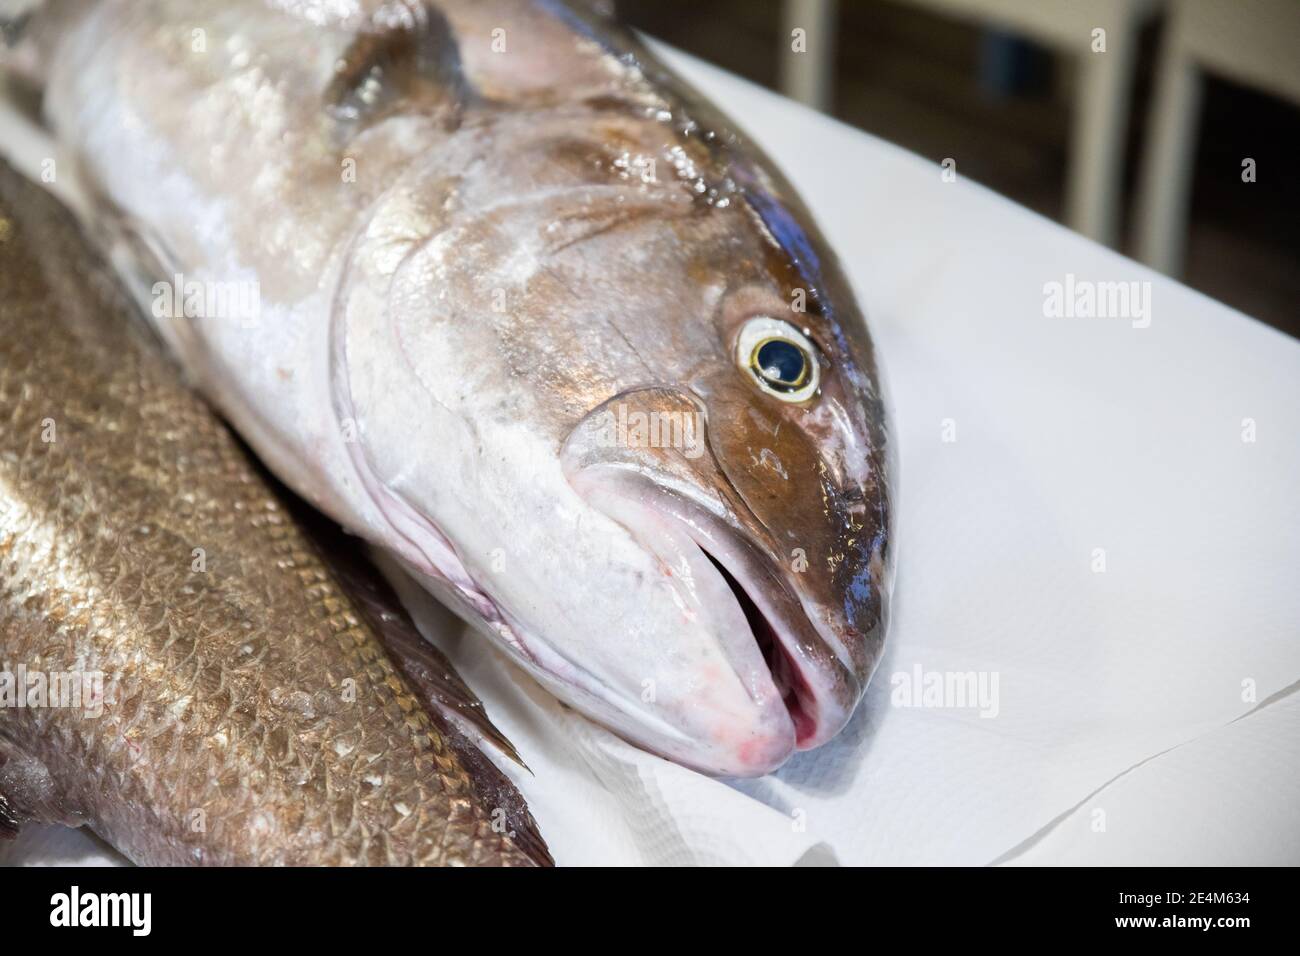 head and face with eye and mouth of fresh raw dead big fish Greater Amberjack, or Seriola Dumerili, on white paper tablecloth on table Stock Photo